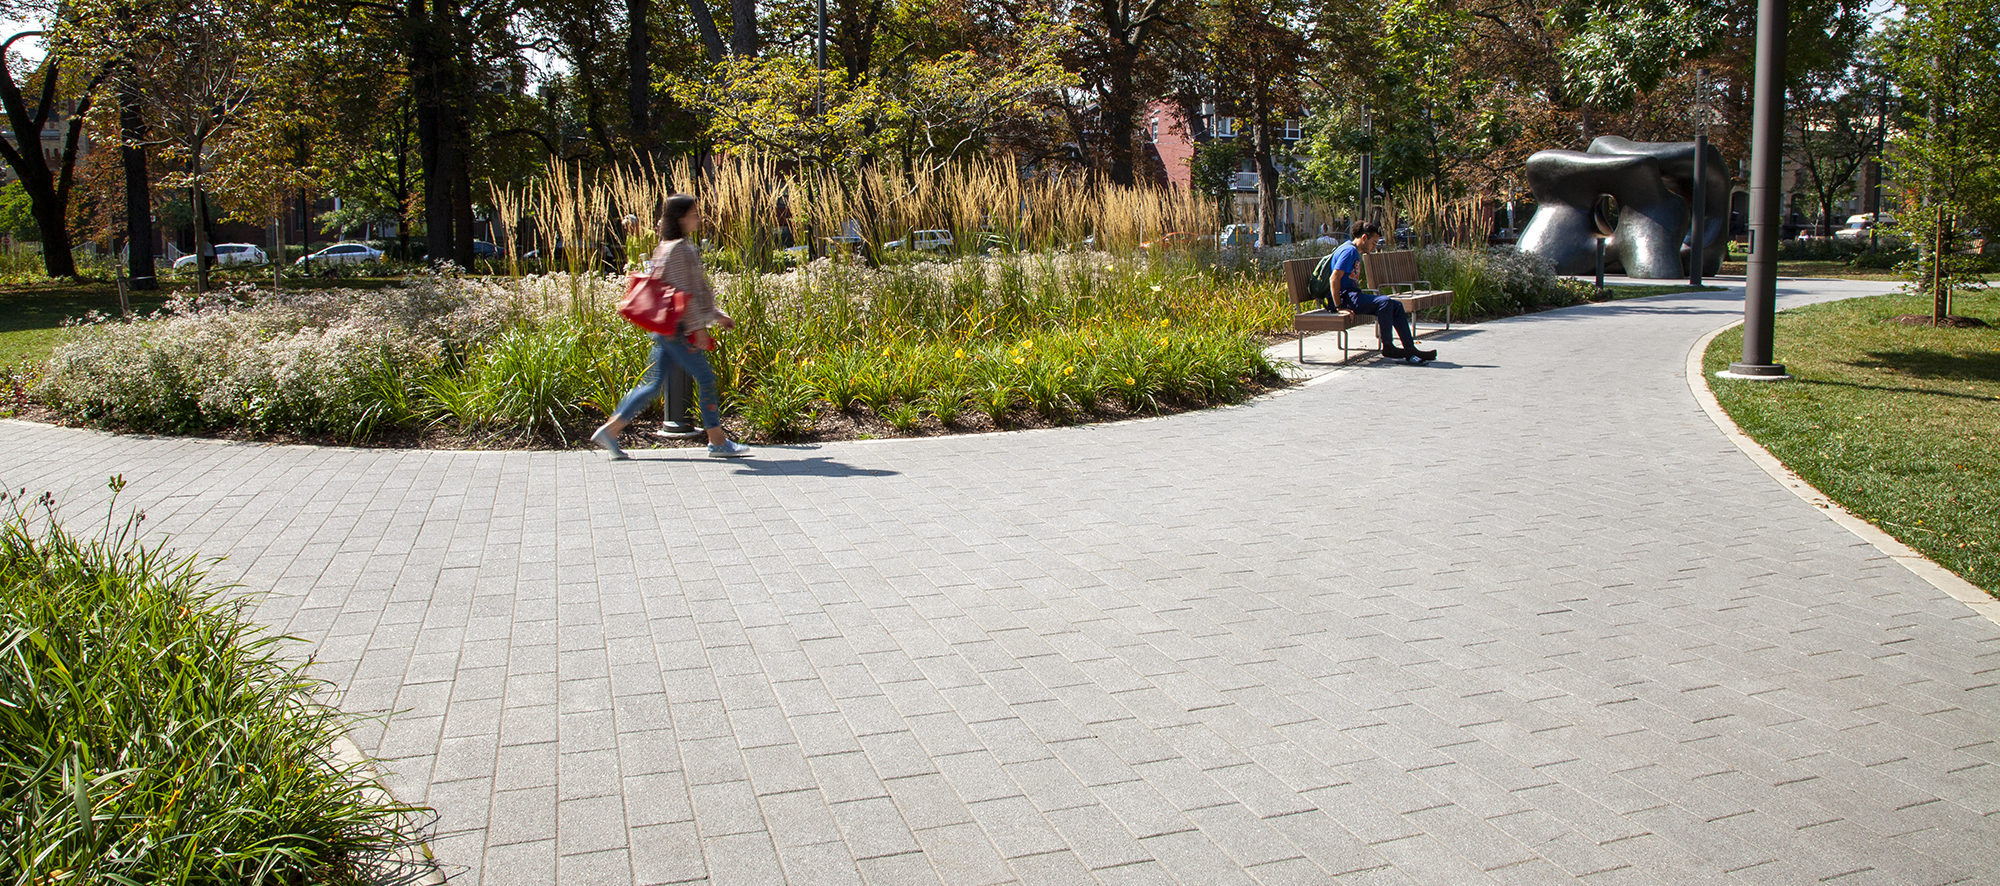 A visitor strolls past a garden bed while a pedestrian sits on a bench, with the backdrop of a bronze sculpture atop grey Series pavers.